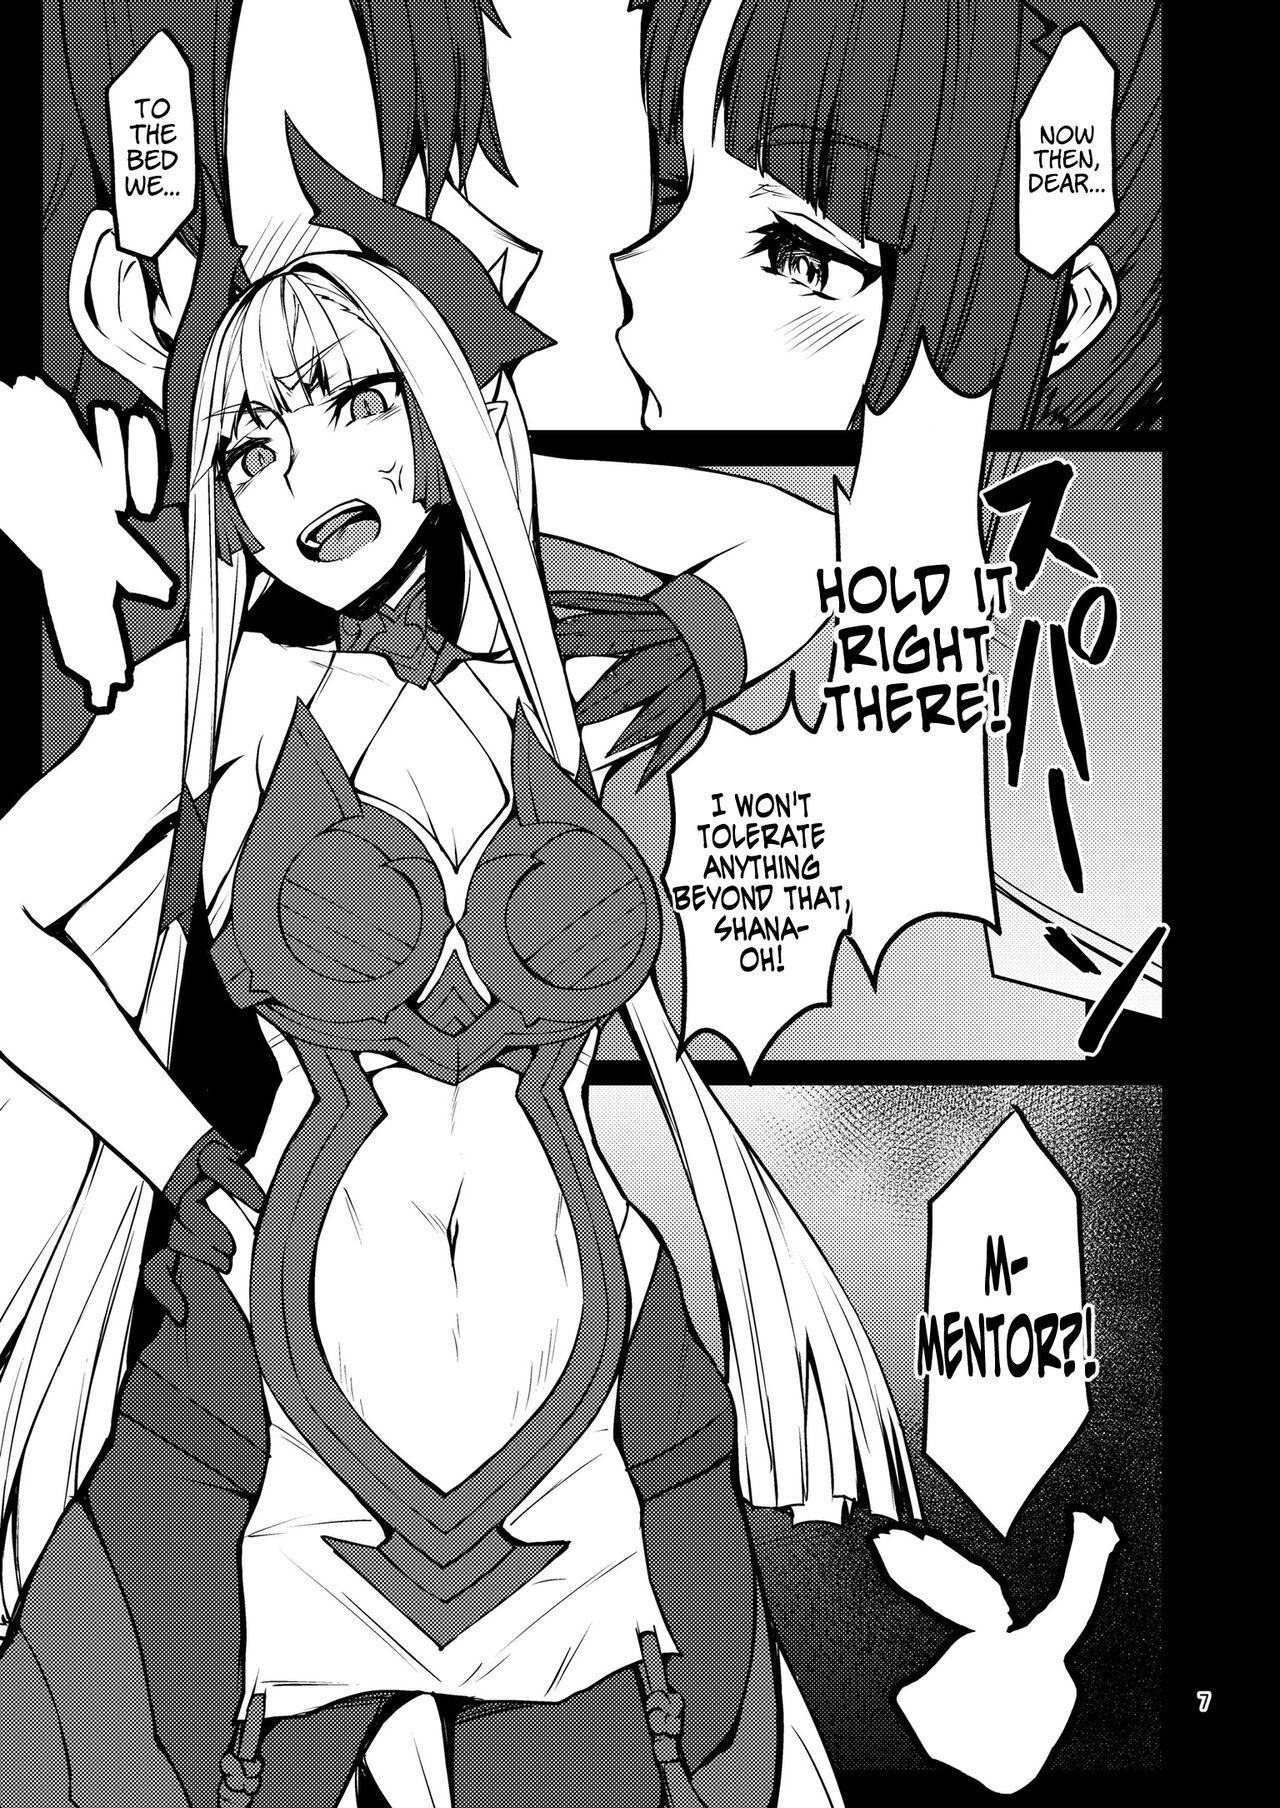 Hoe Kiichi Hougen Book: Mentor - Fate grand order Masterbation - Page 6